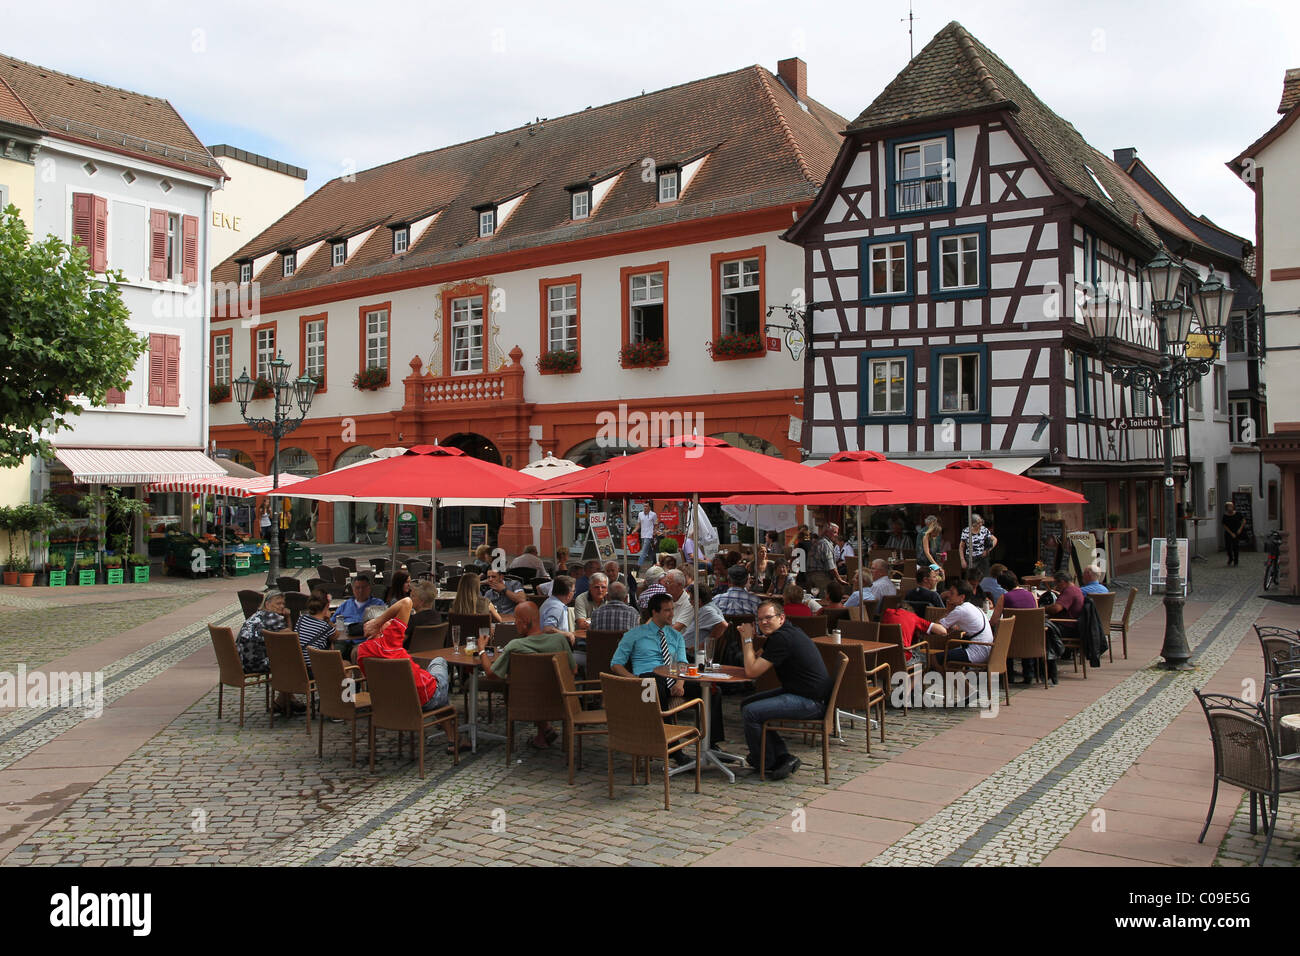 Half-timbered houses in the old town of Neustadt an der Weinstrasse, Rhineland-Palatinate, Germany, Europe Stock Photo